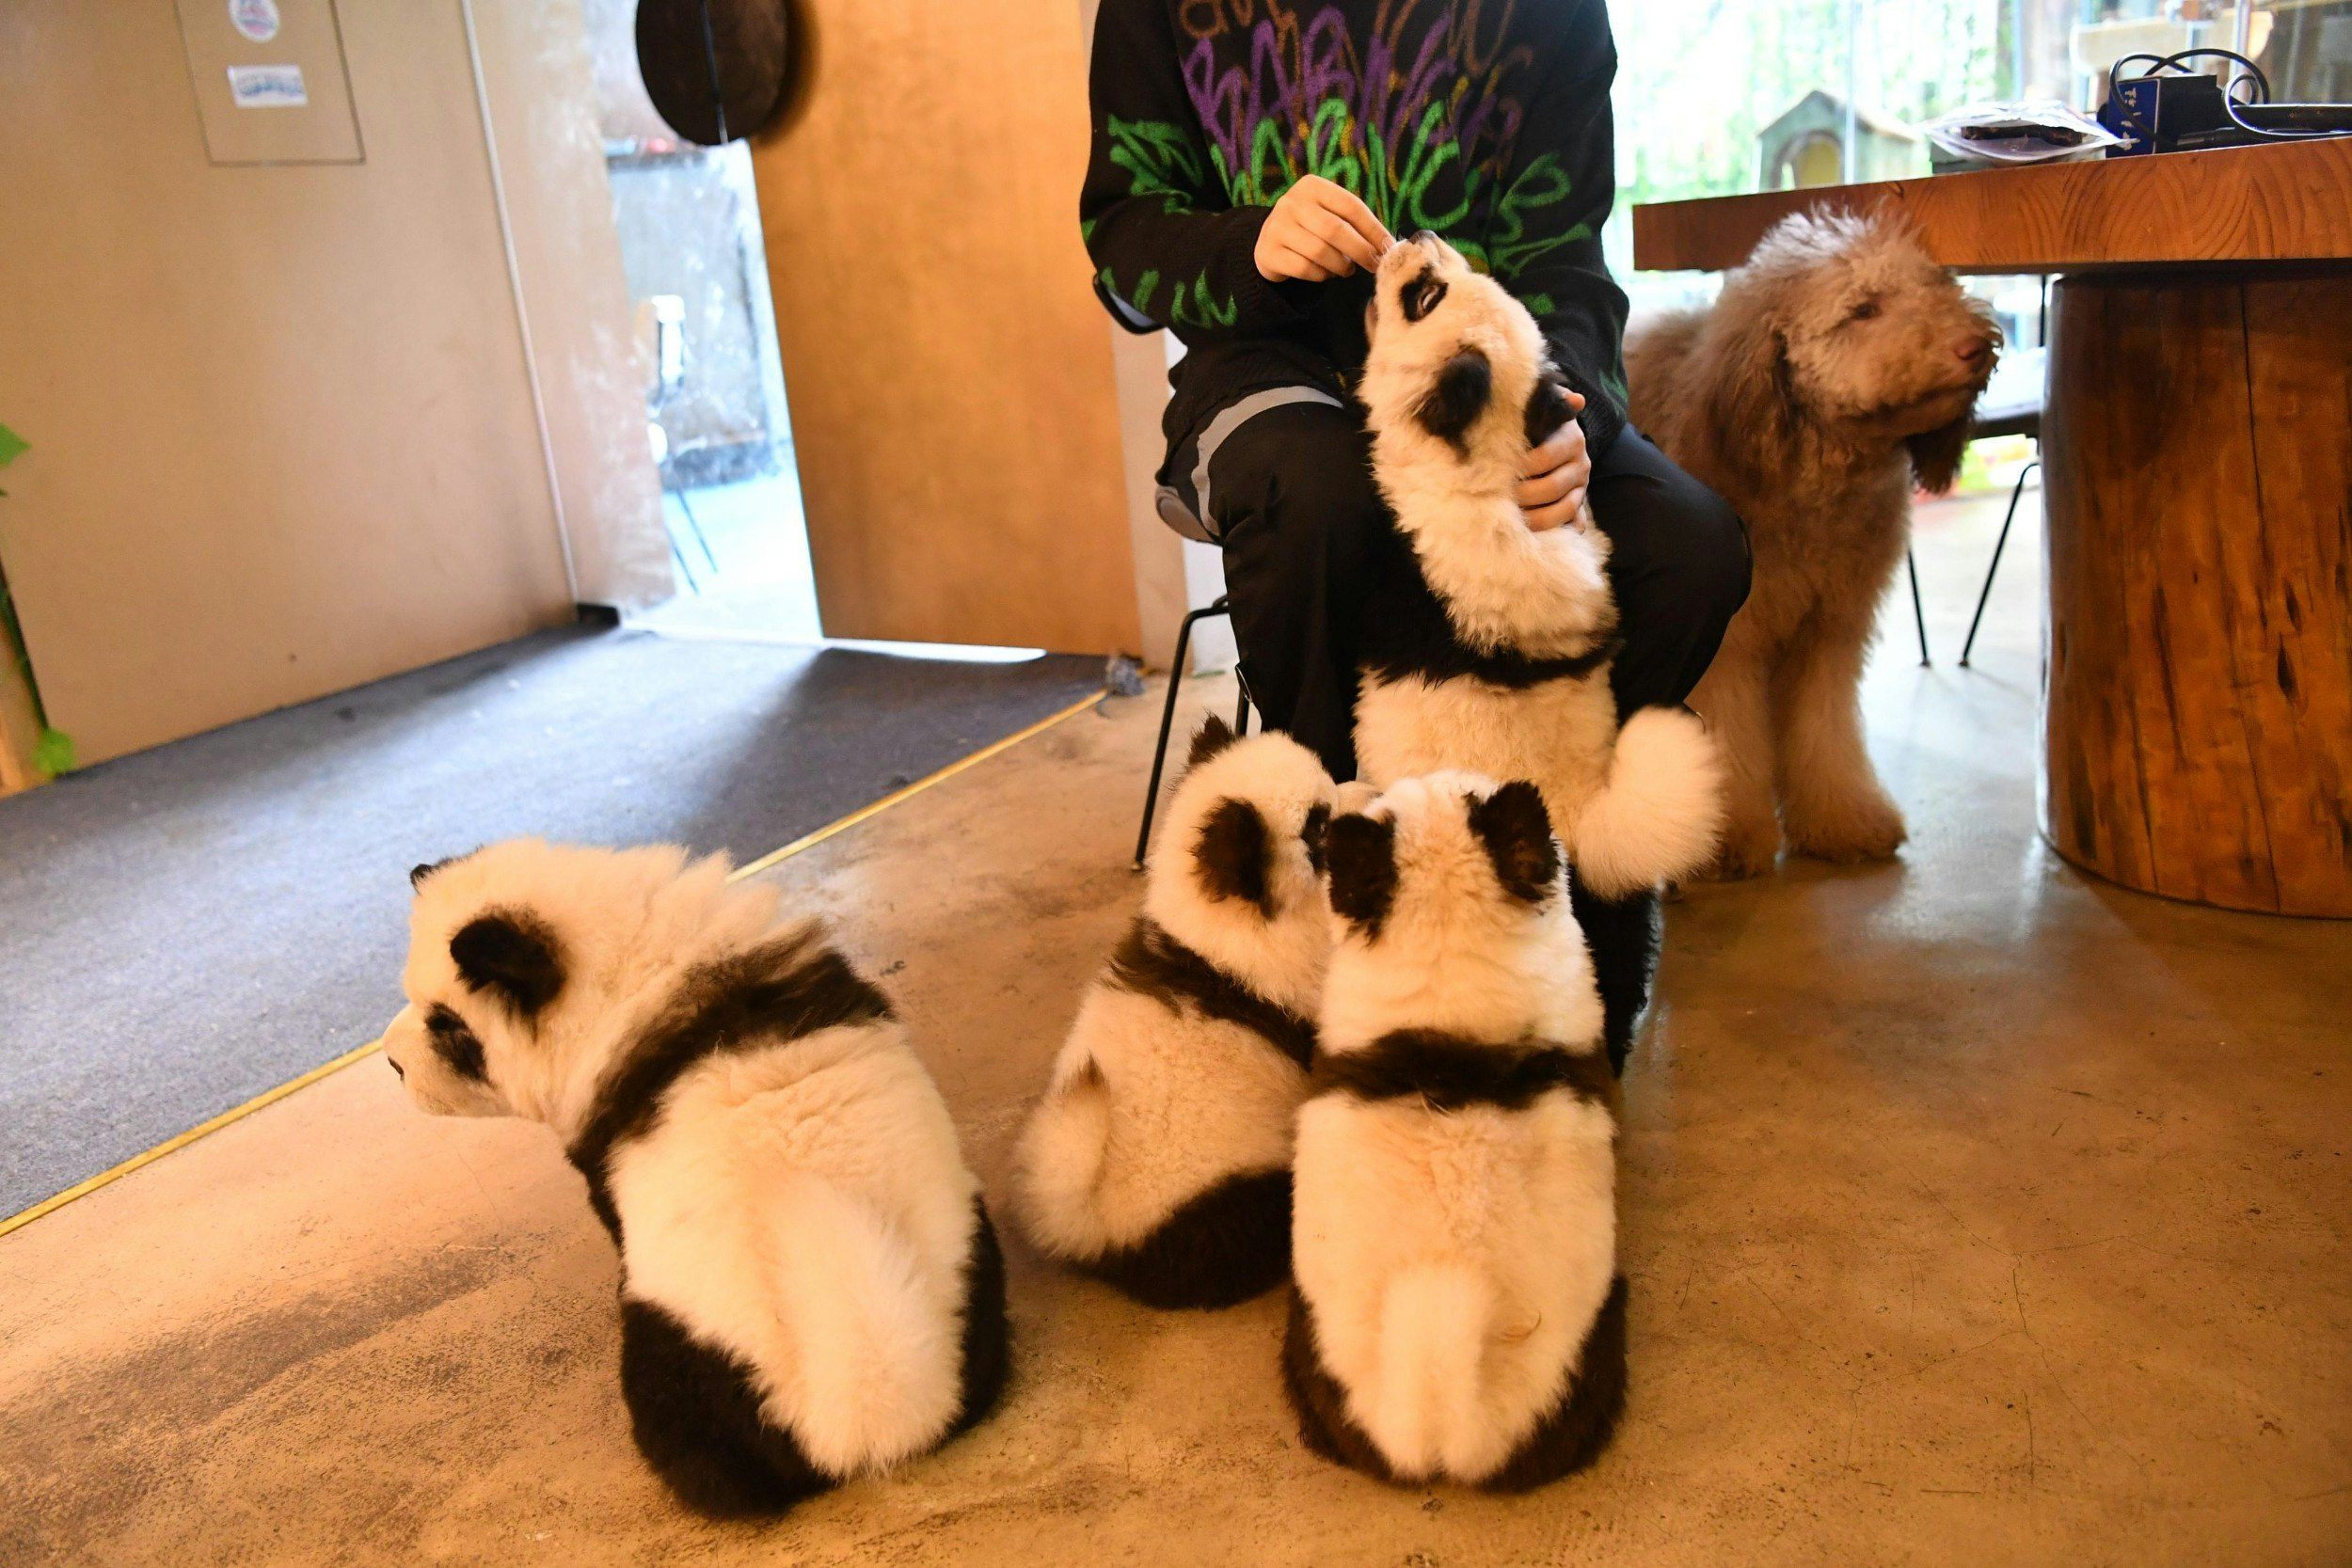 Chow chow dogs painted as giant pandas are seen at a pet cafe